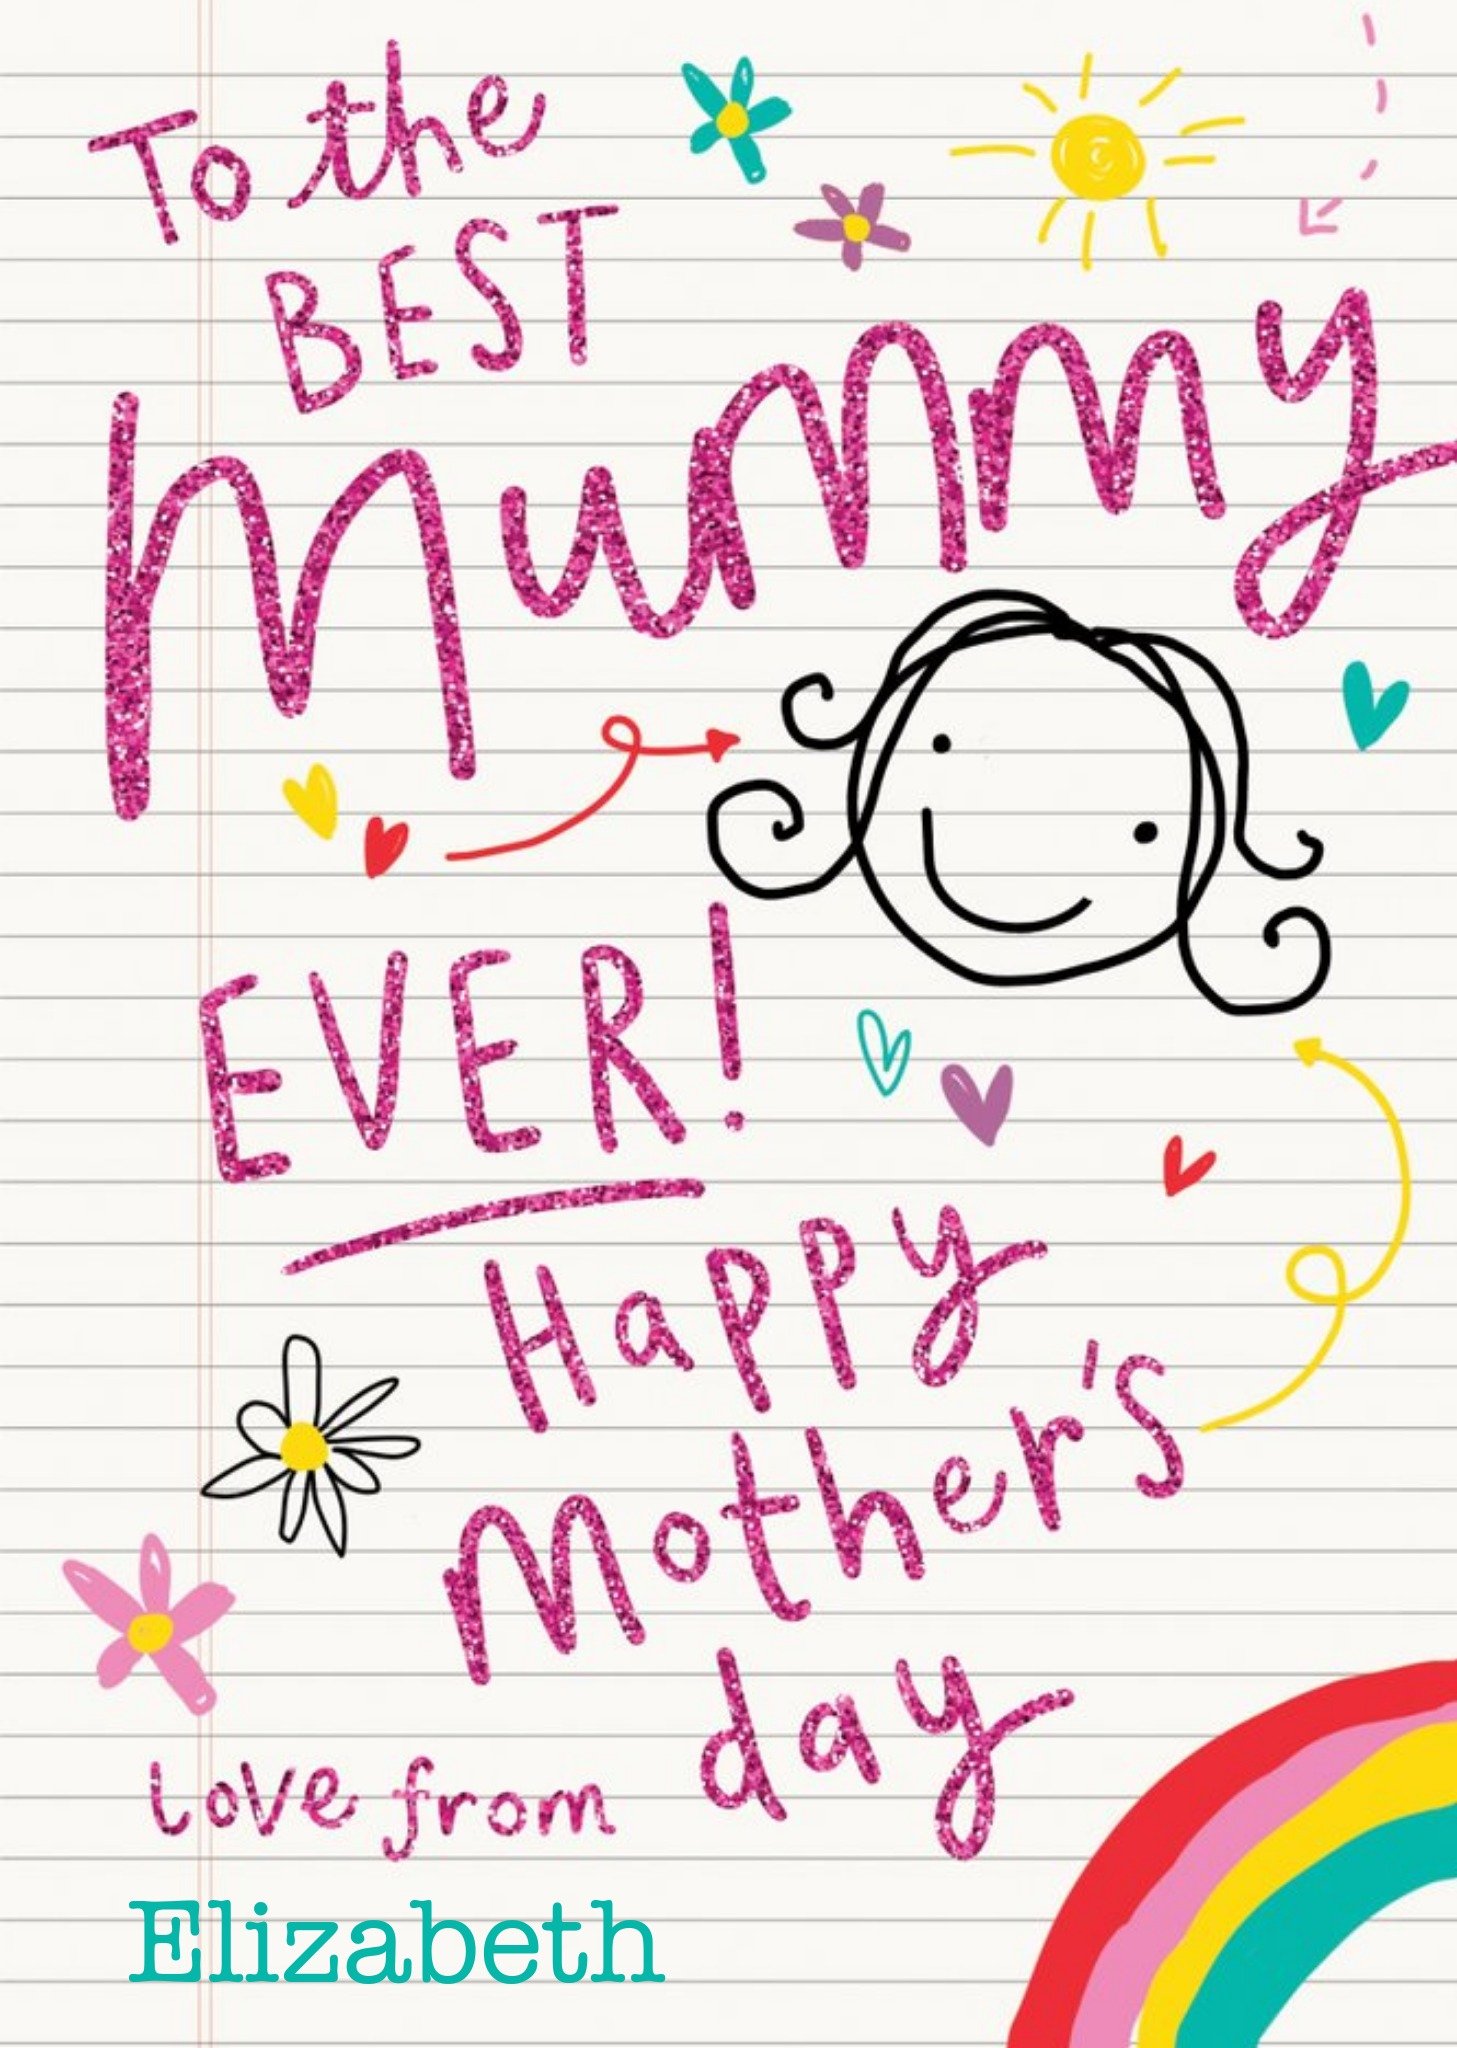 Moonpig Childlike Doodles And Typography On Note Paper Mother's Day Card Ecard